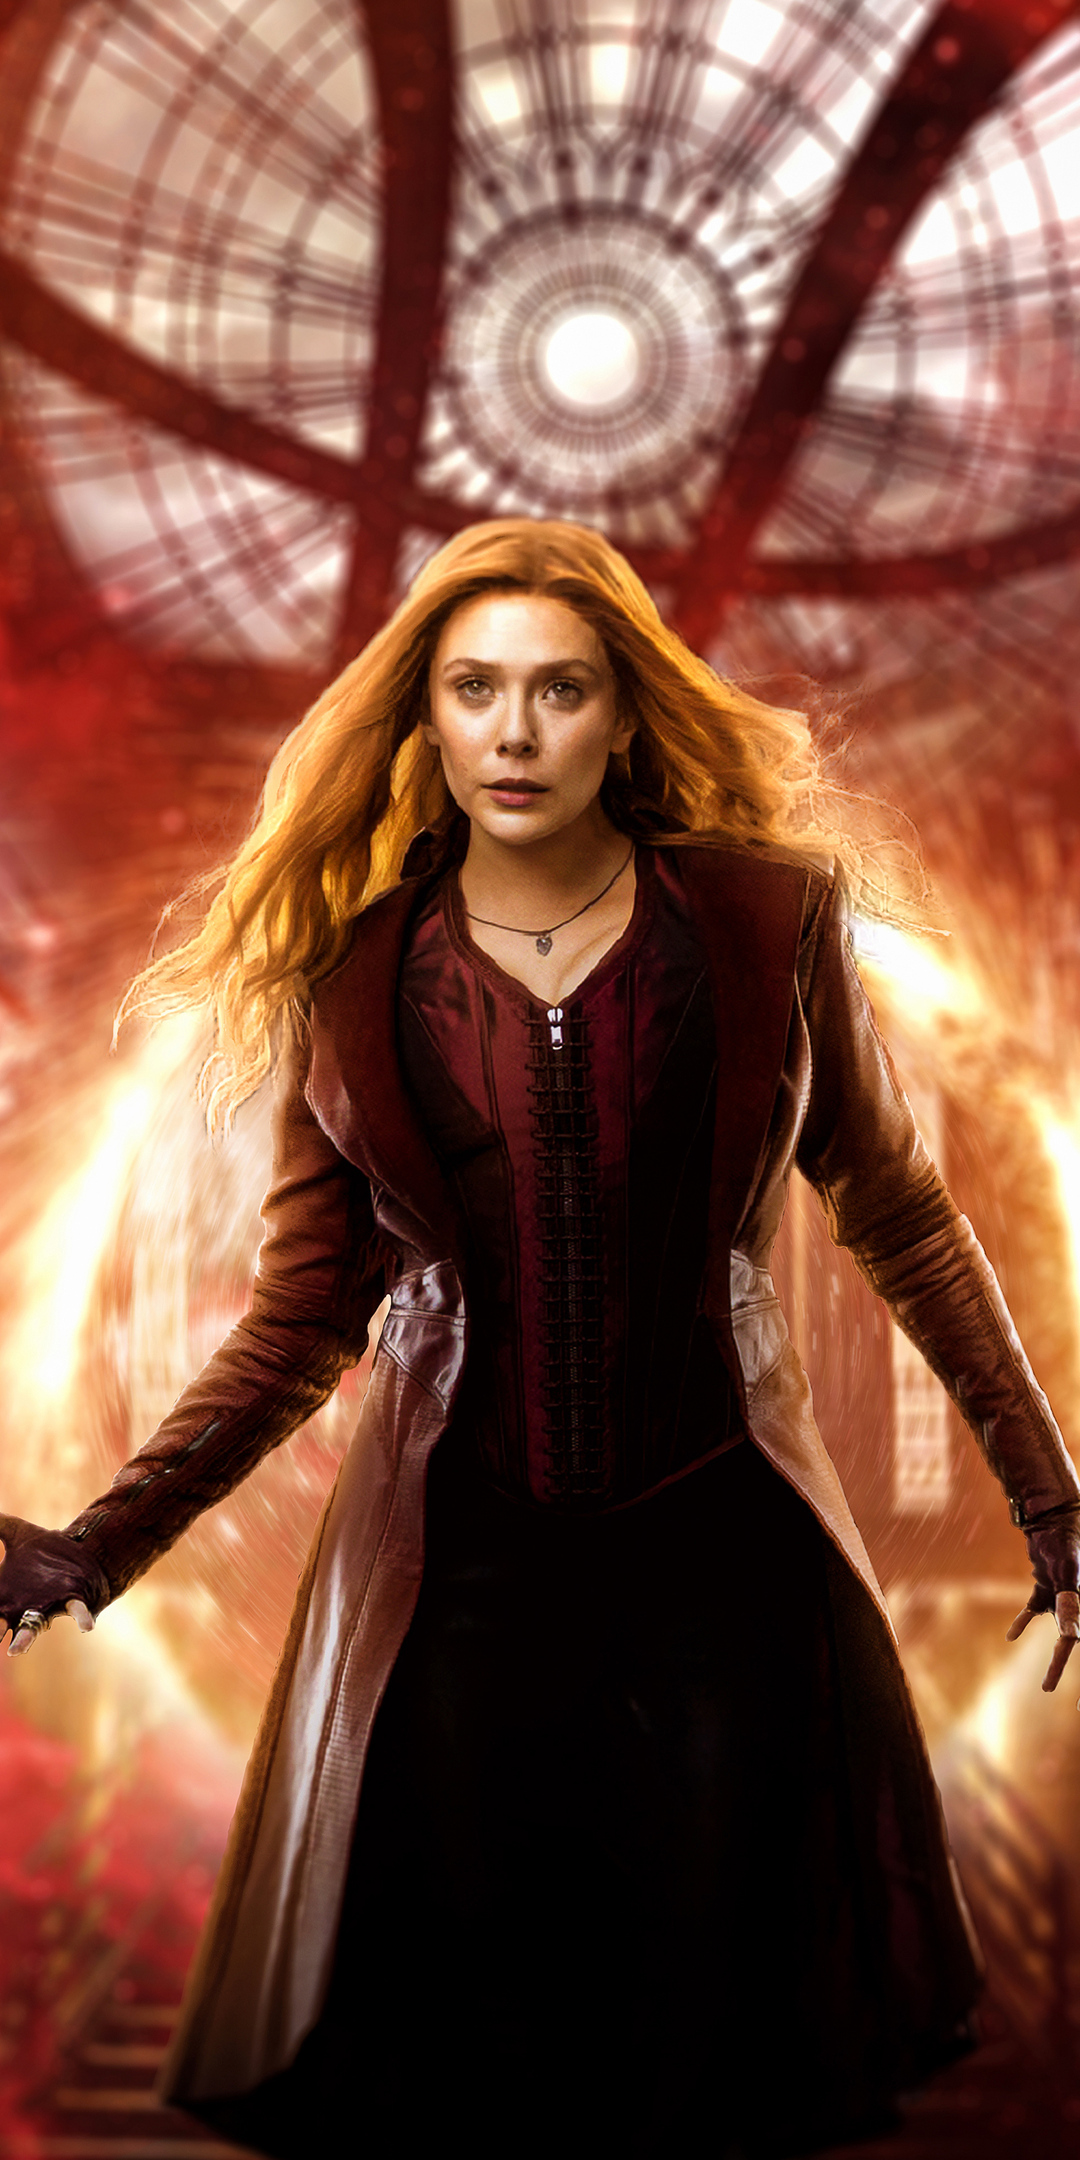 2022-doctor-strange-in-the-multiverse-of-madness-scarlet-witch-4k-aw.jpg